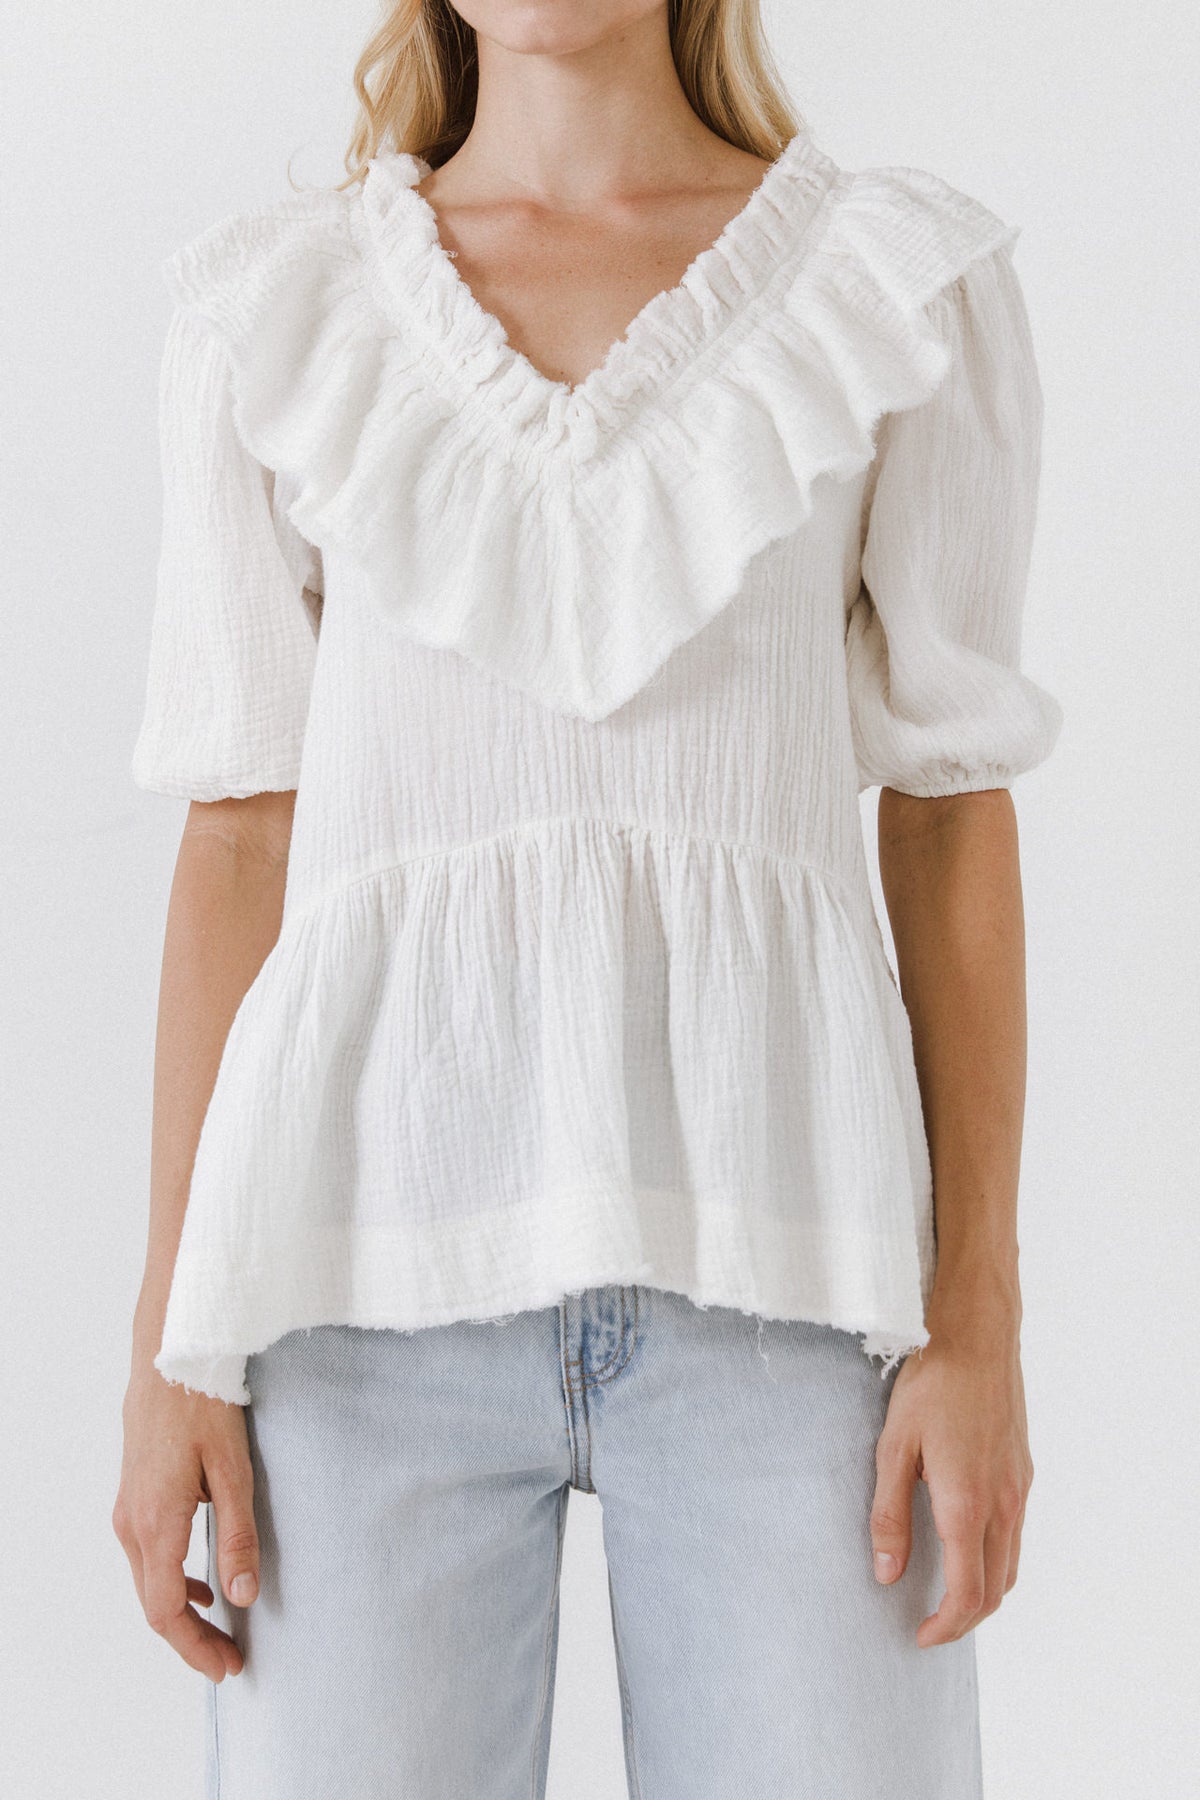 FREE THE ROSES - Ruffle Neckline Blouse - BLOUSES available at Objectrare